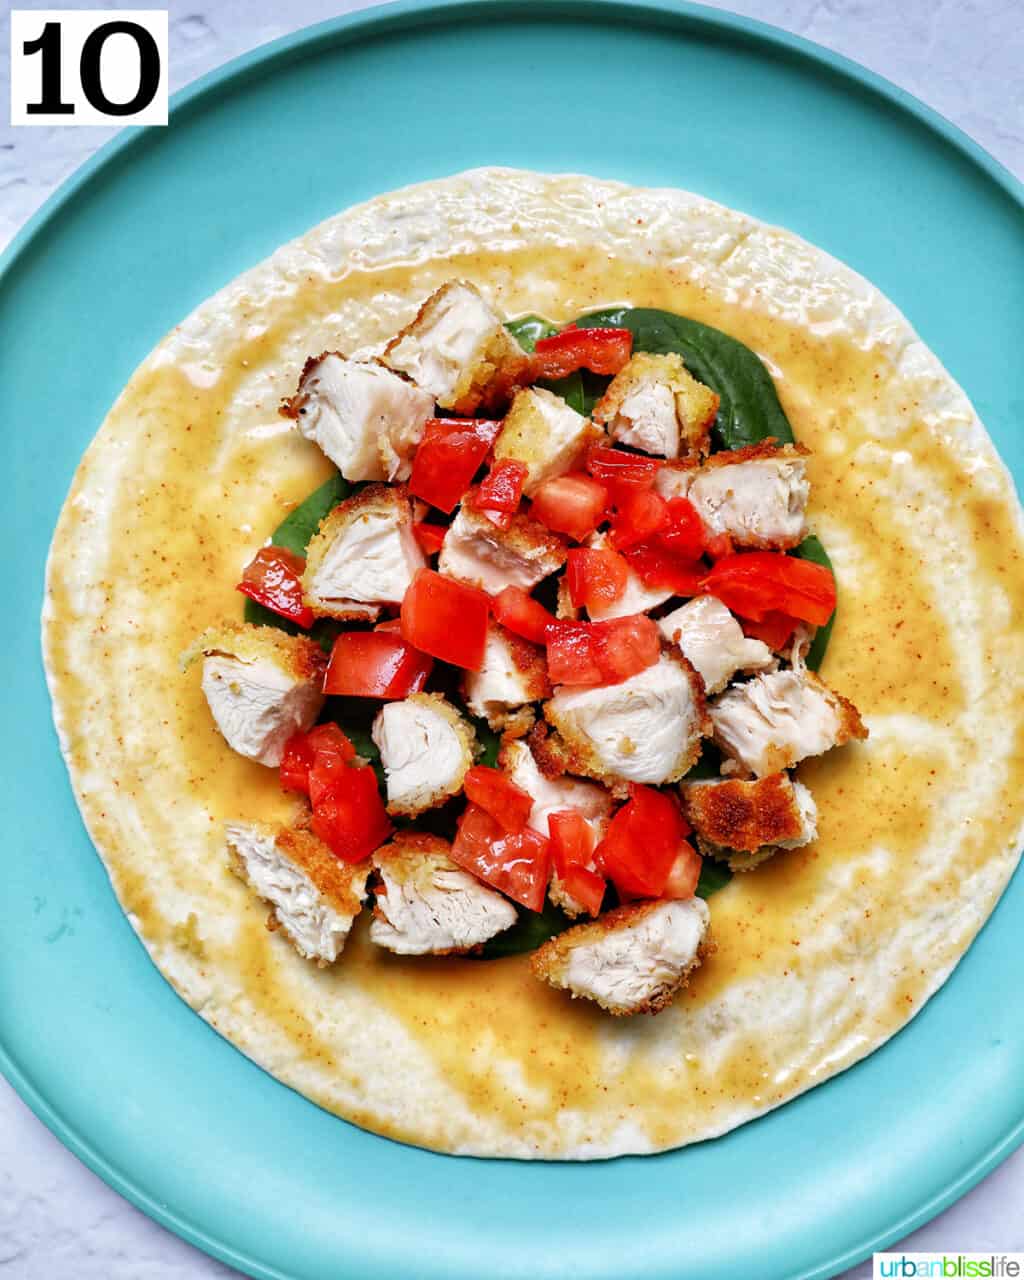 tomatoes, chicken, spinach on a tortilla wrap.